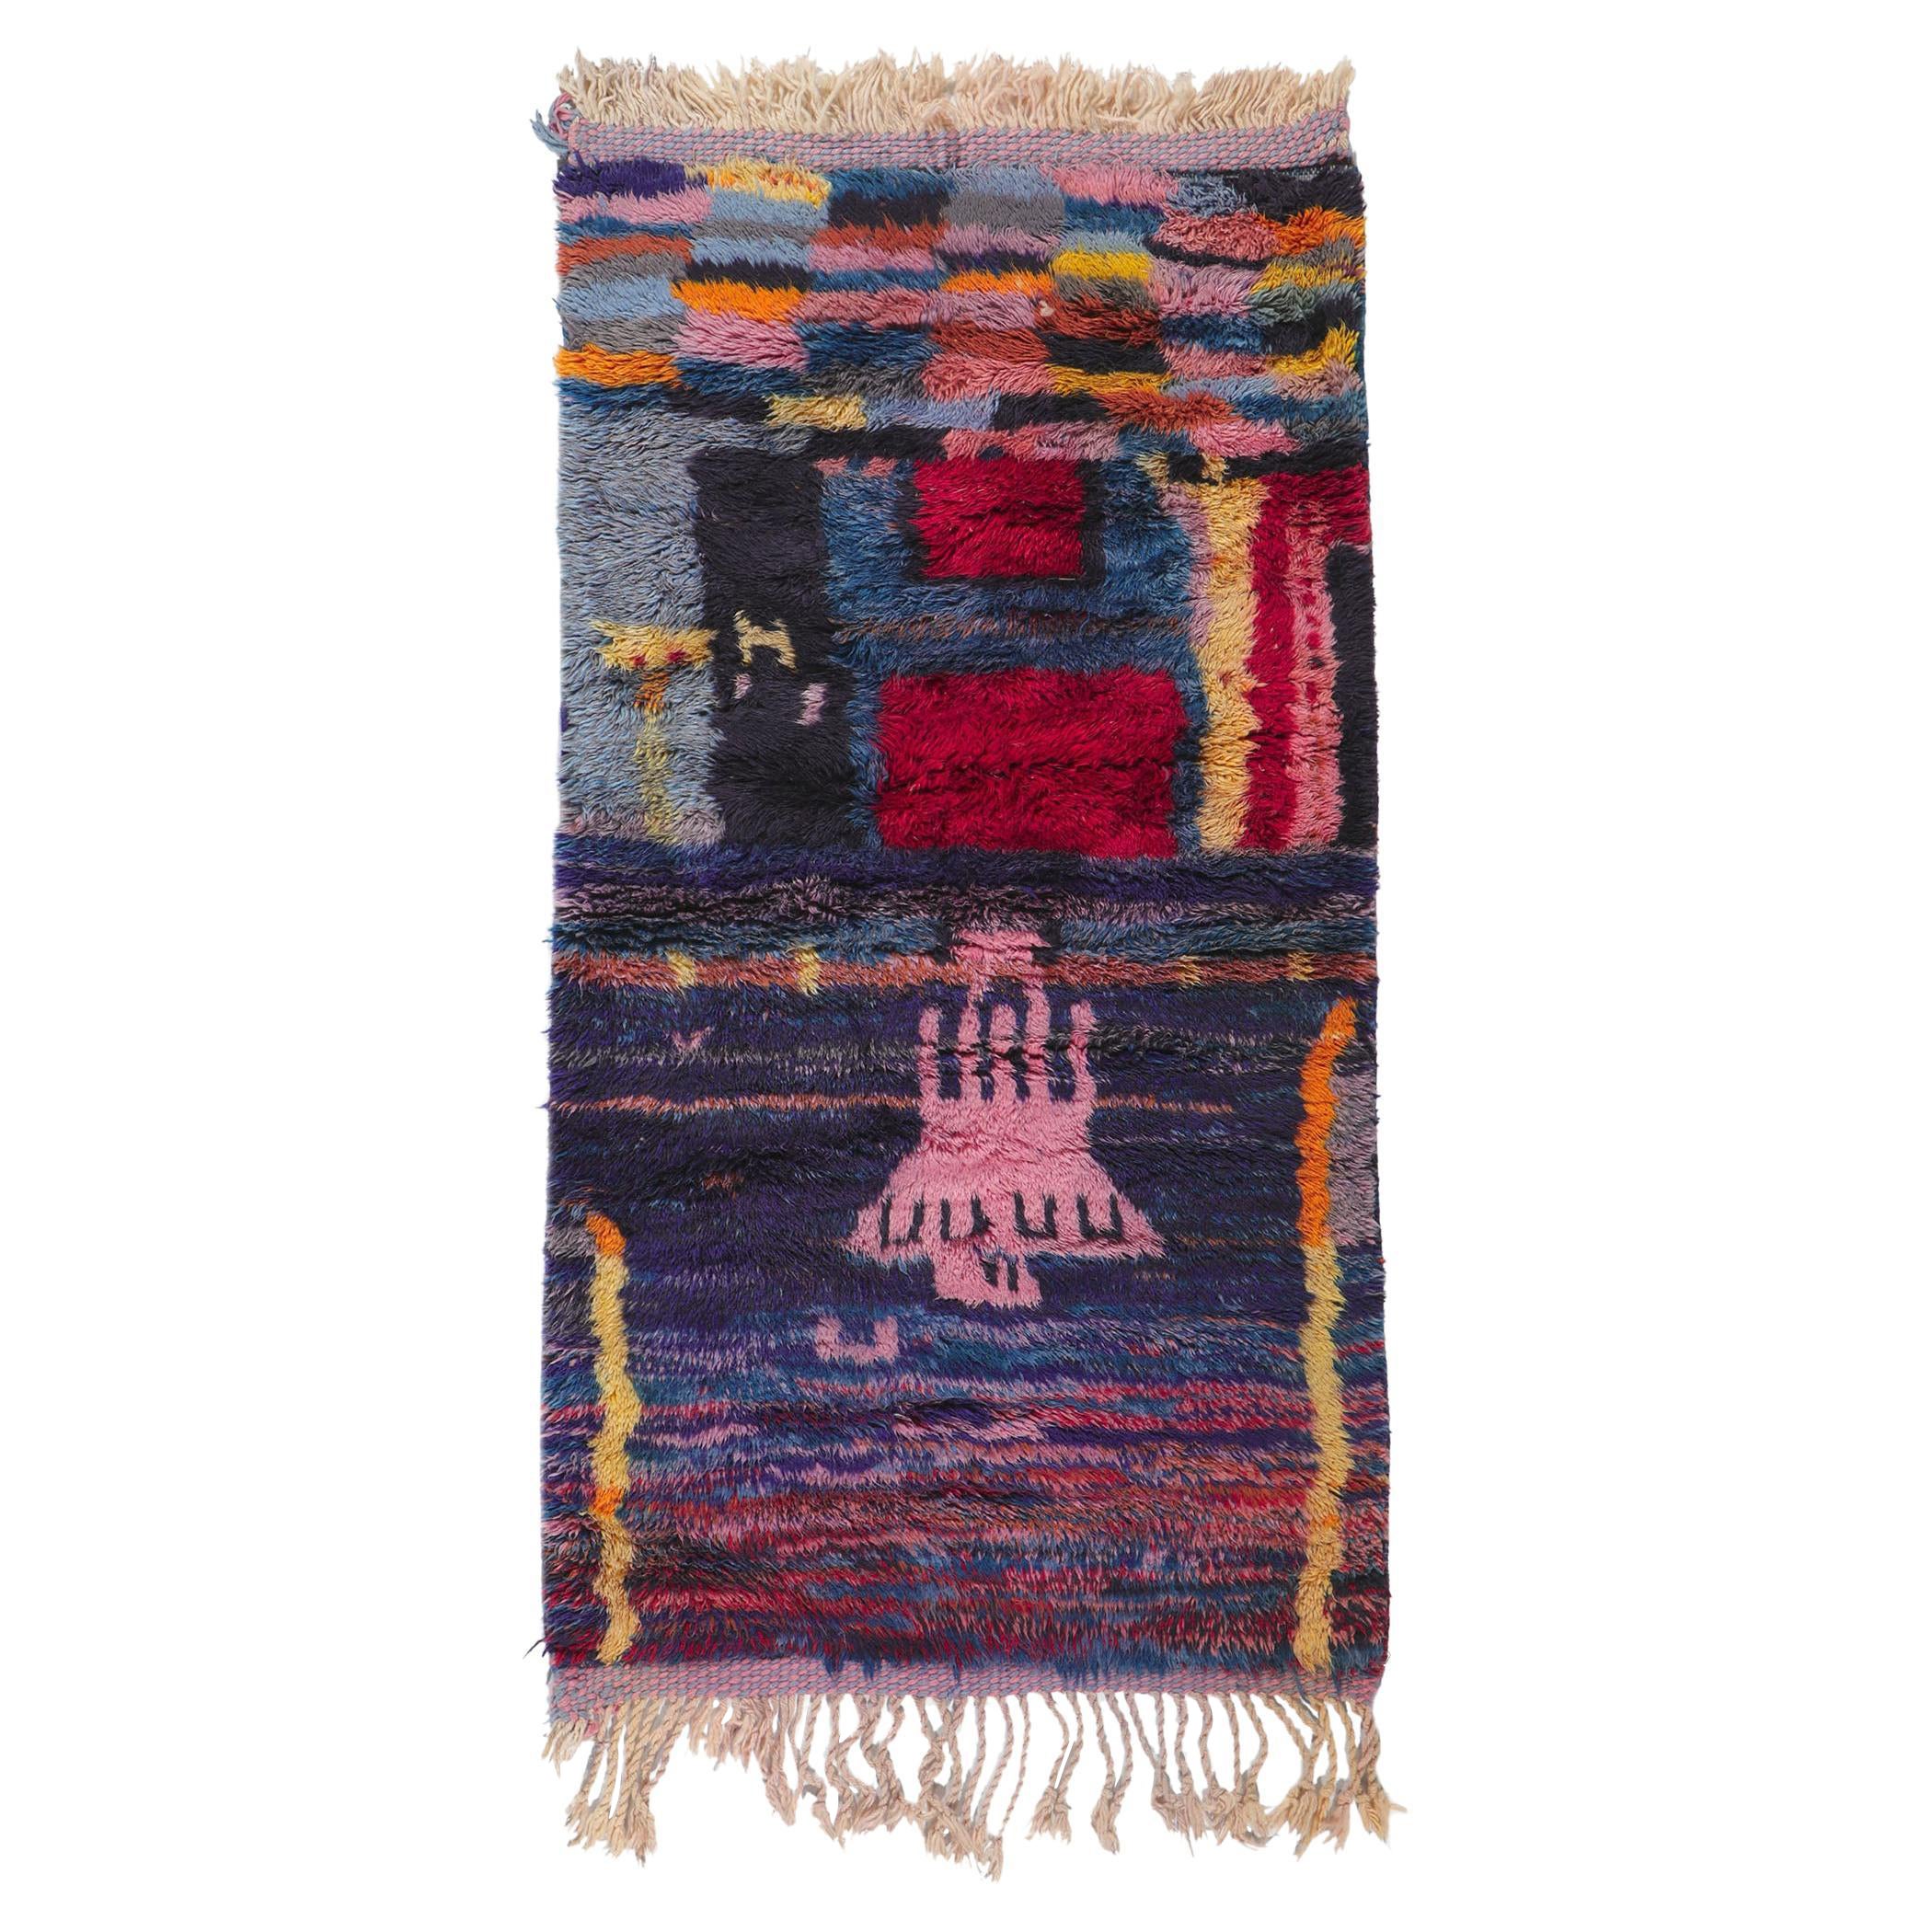 Contemporary Colorful Beni Ourain Moroccan Rug by Berber Tribes of Morocco